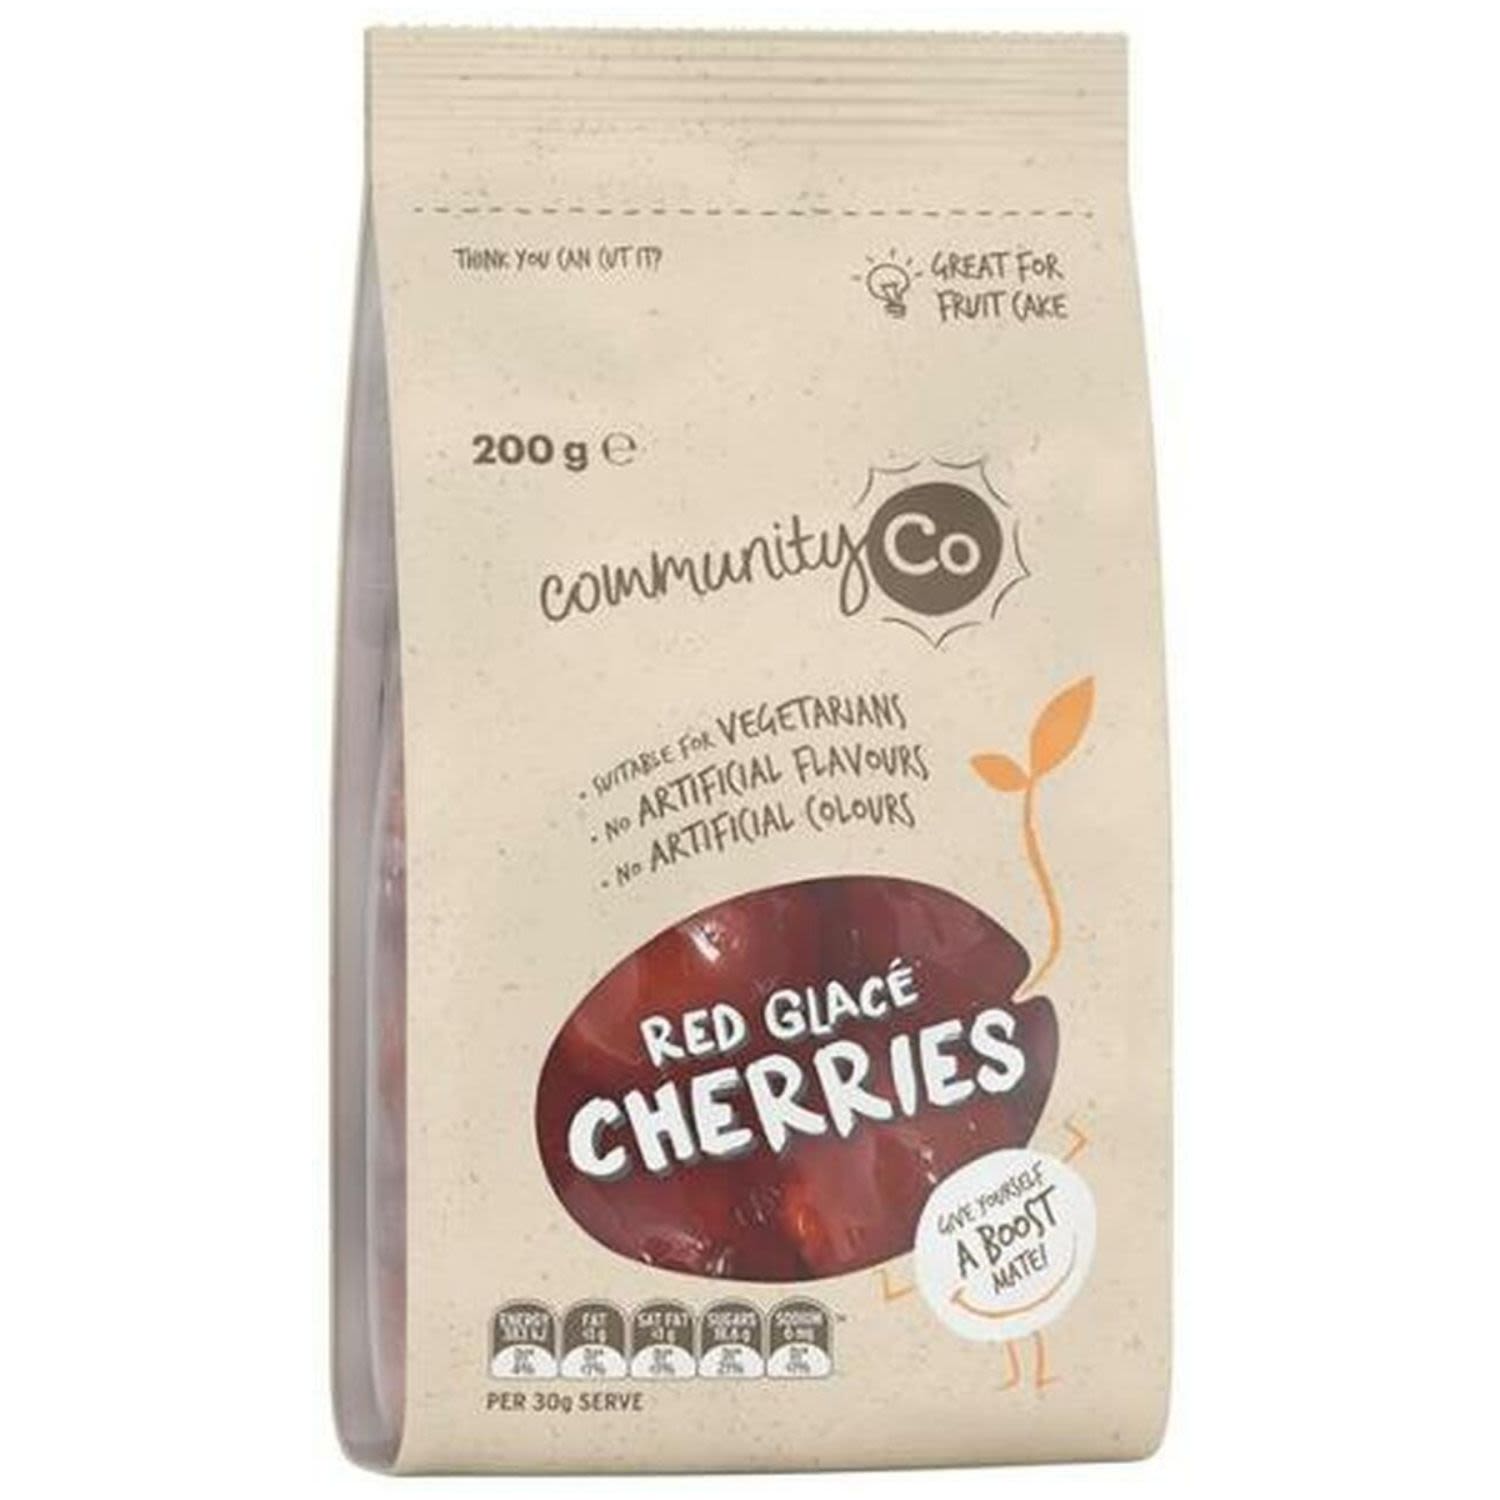 Community Co Red Glace Cherries, 200 Gram